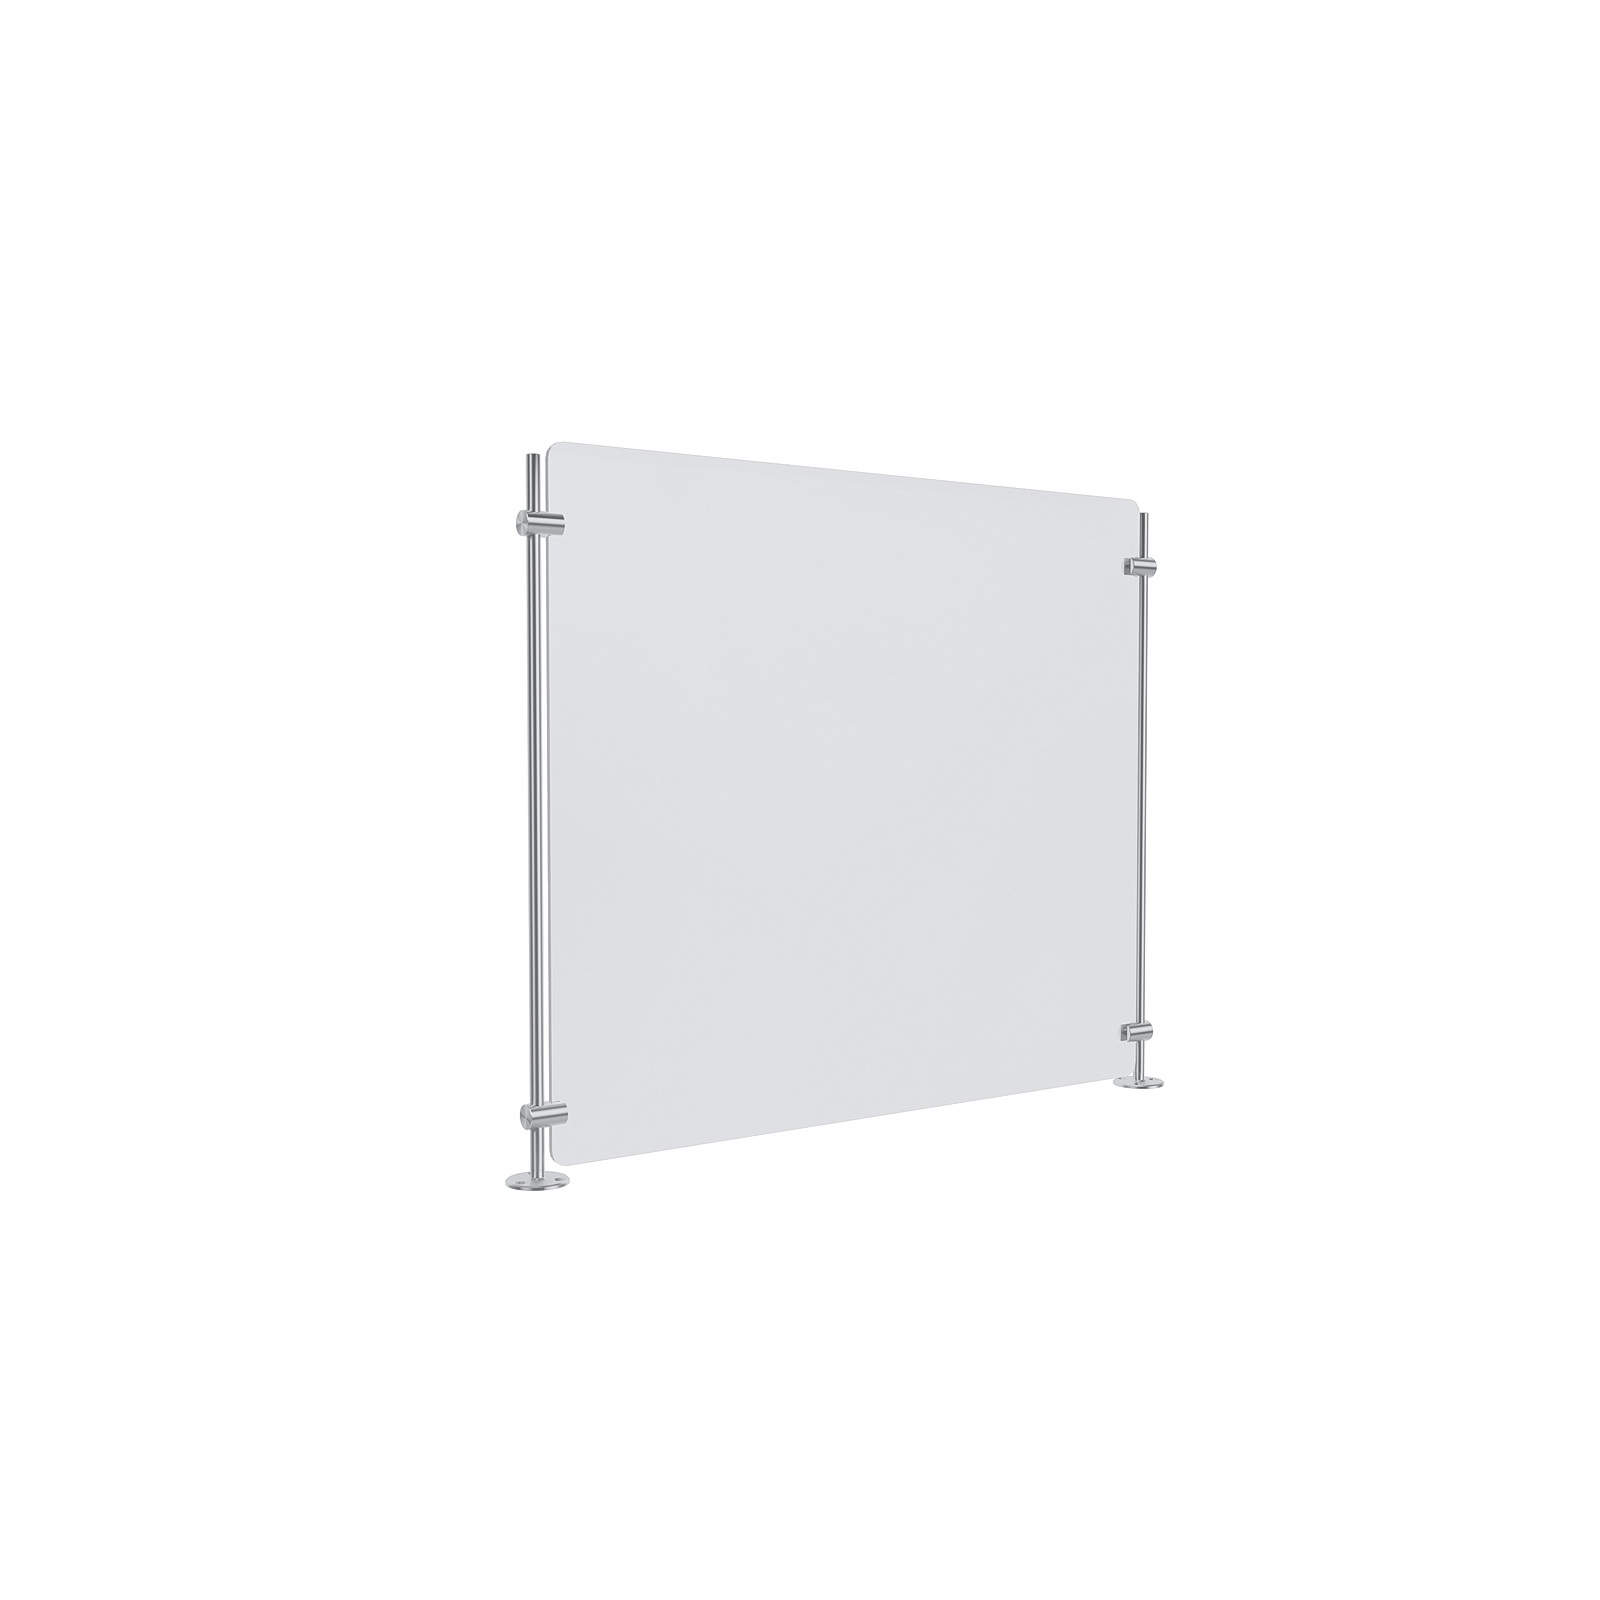 Clear Acrylic Sneeze Guard 23-1/2'' Wide x 20'' Tall, with (2) 20'' Tall x 3/8'' Diameter Clear Anodized Aluminum Rods on the Side.